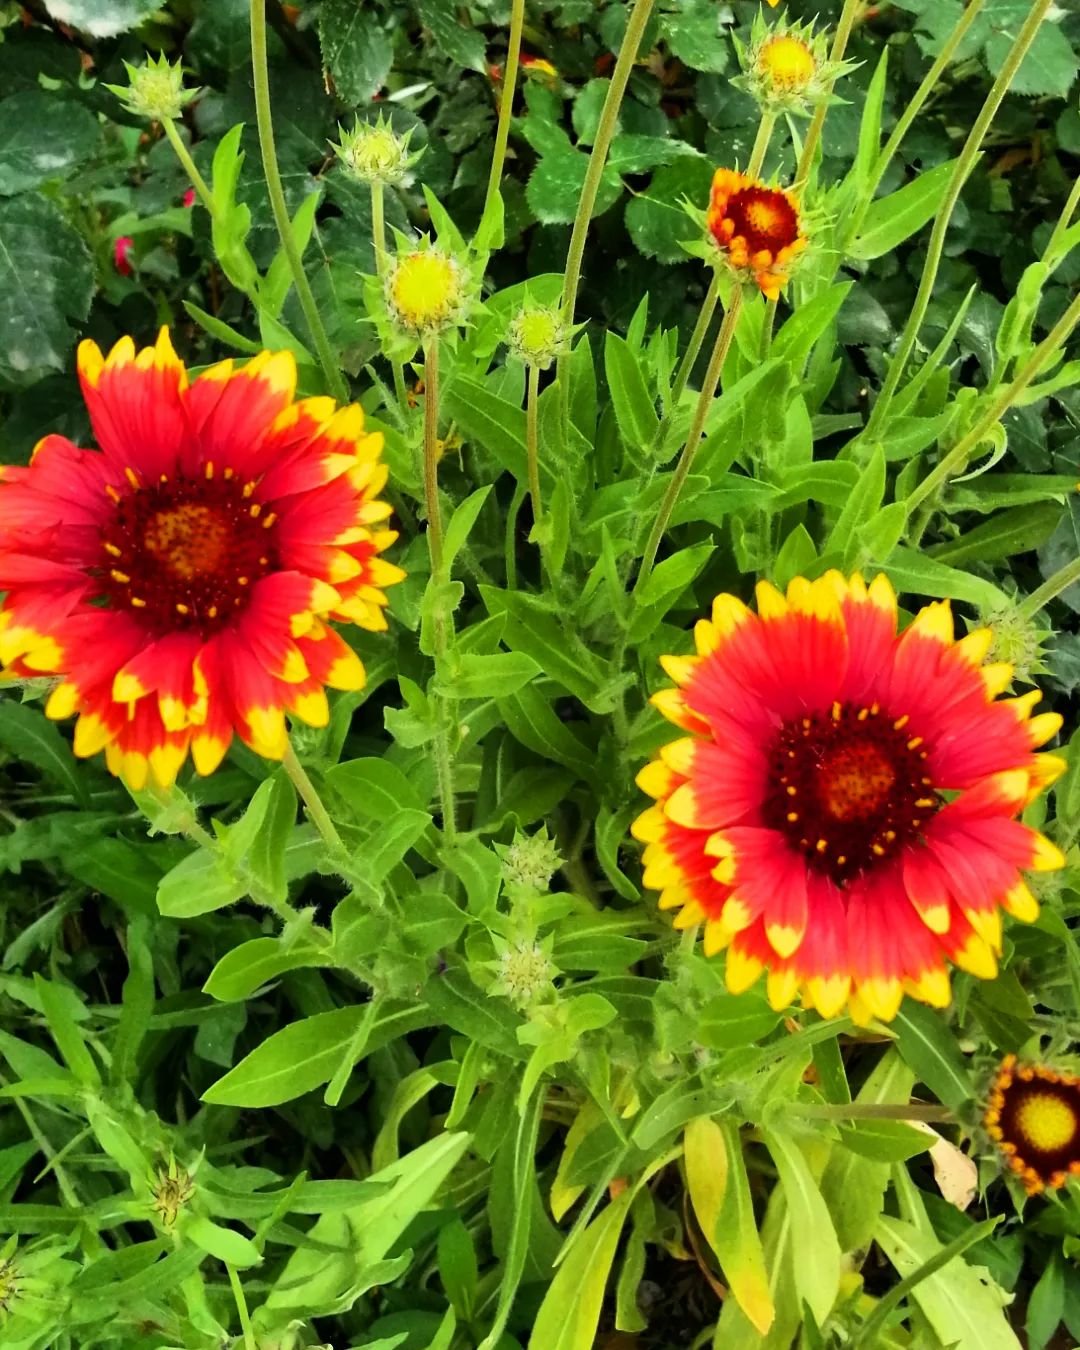 Two Gaillardia flowers, one red and one yellow, blooming in the grass.